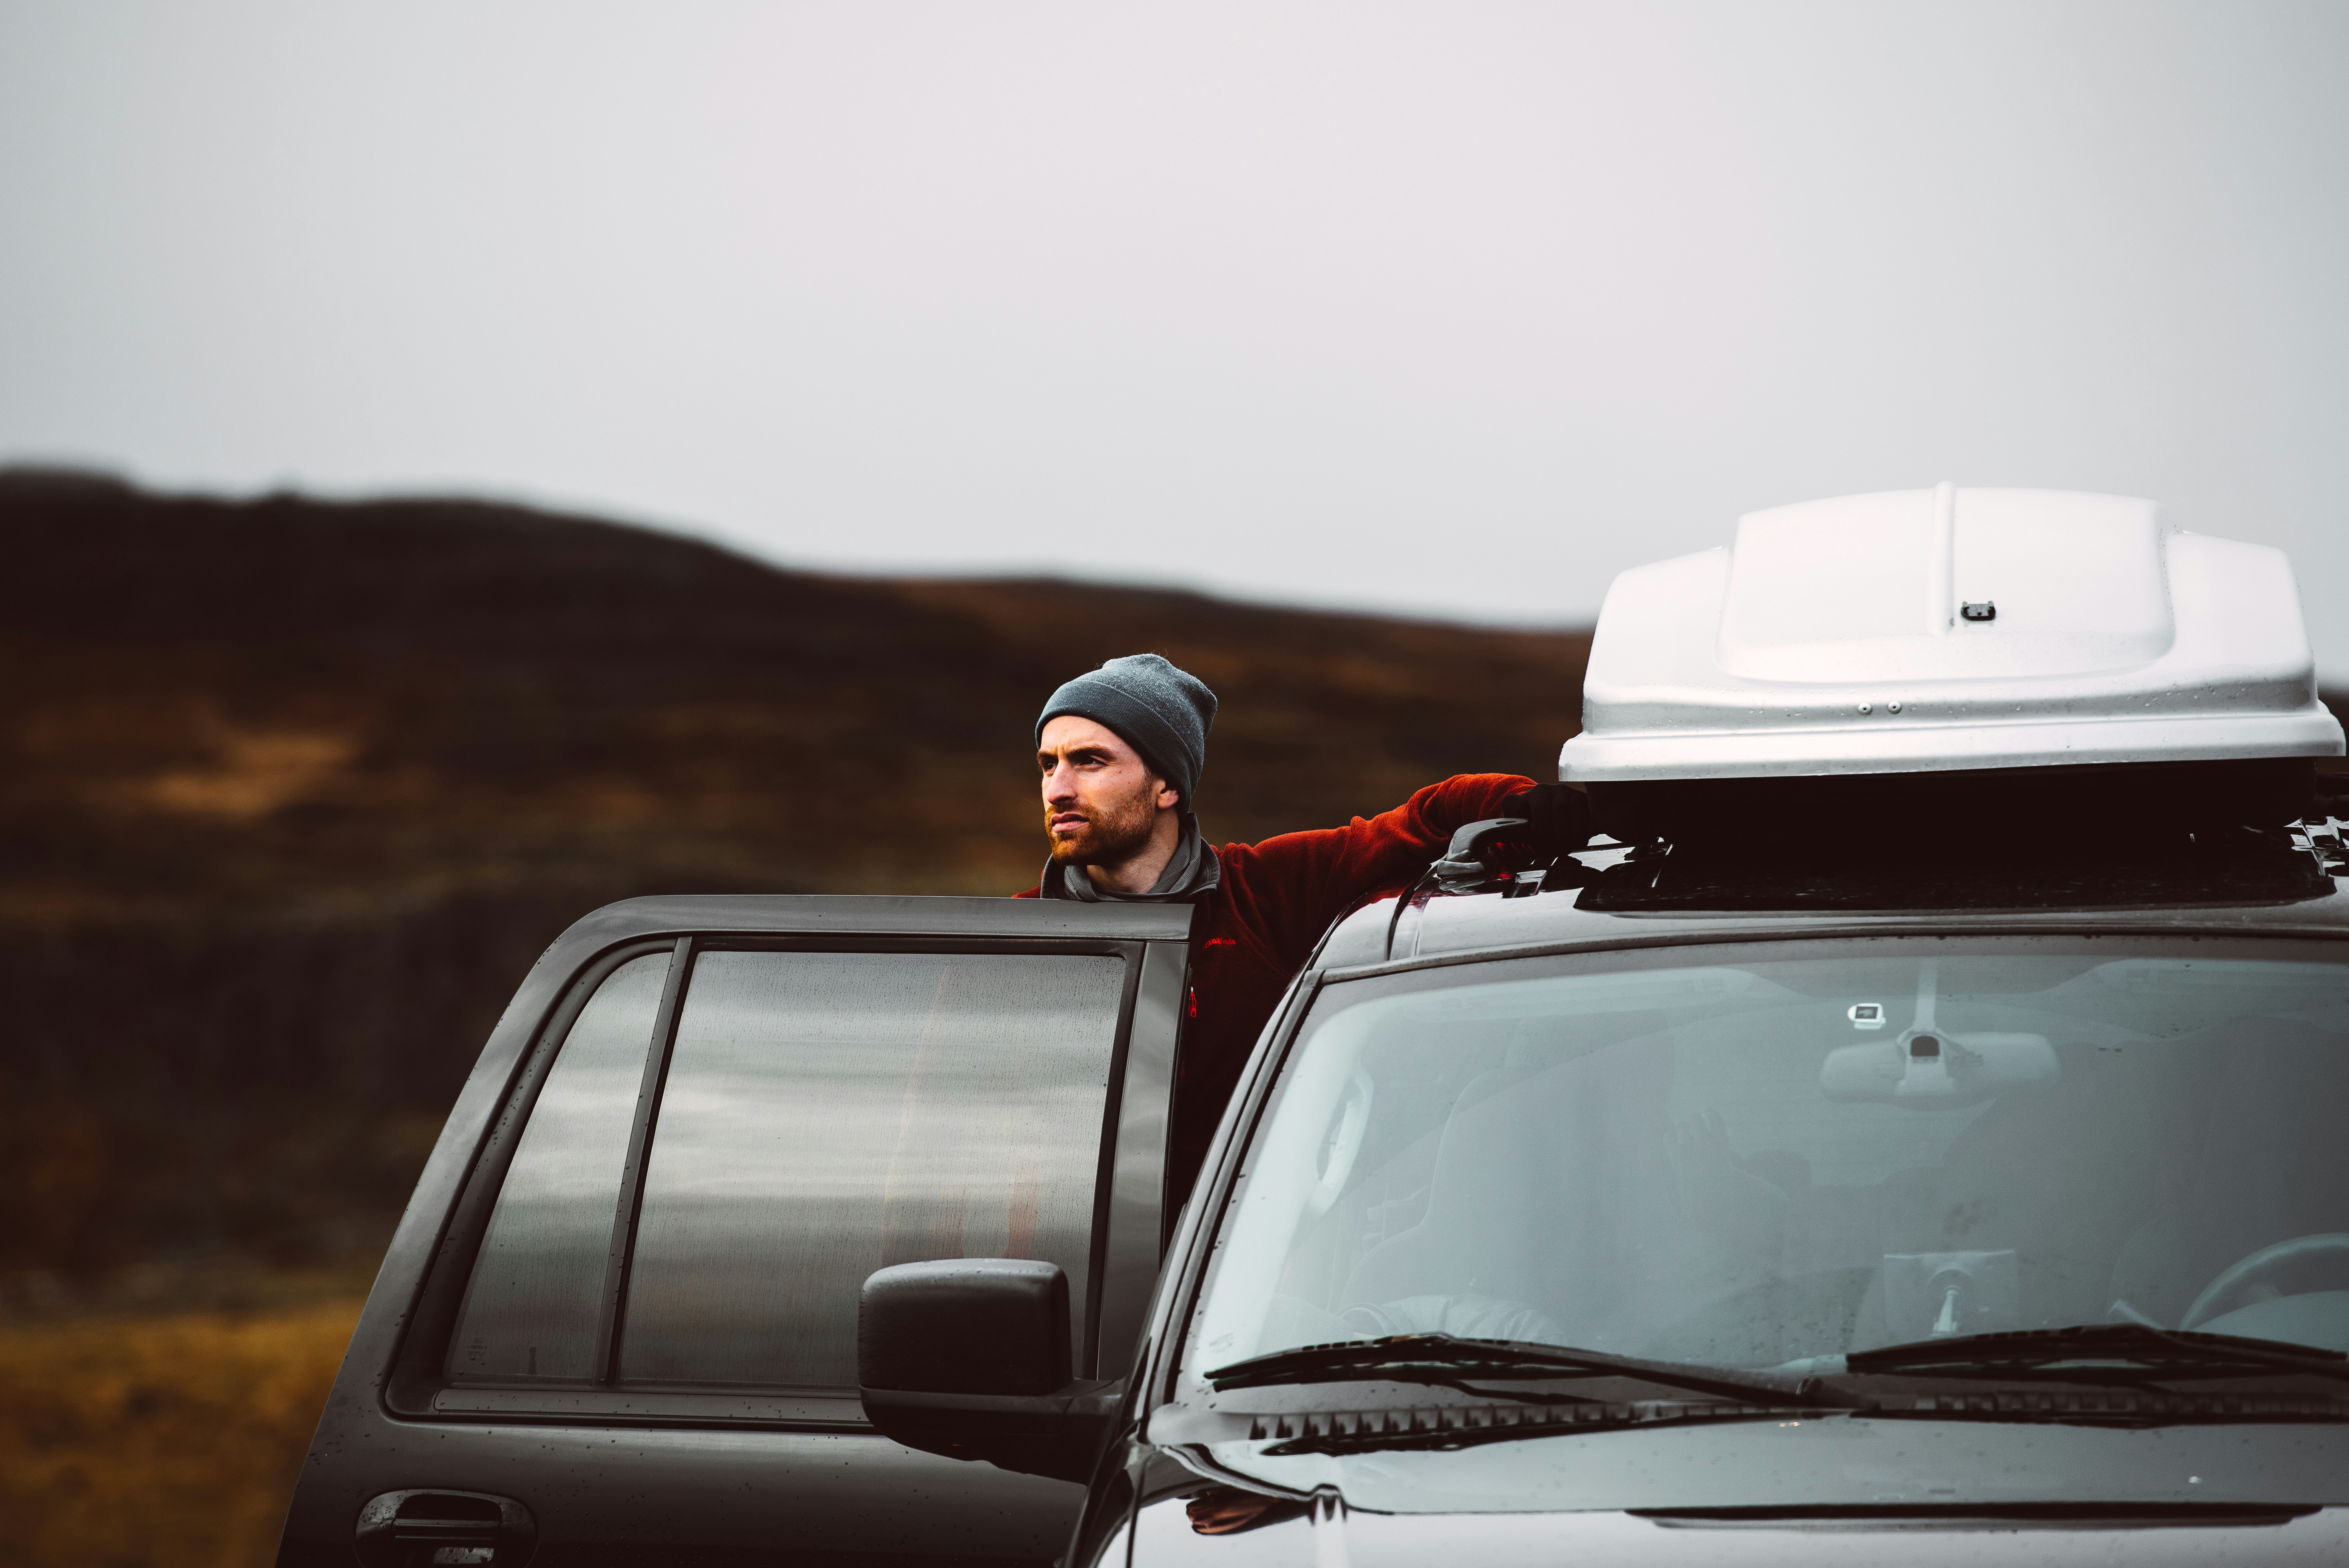 Road trip in Iceland